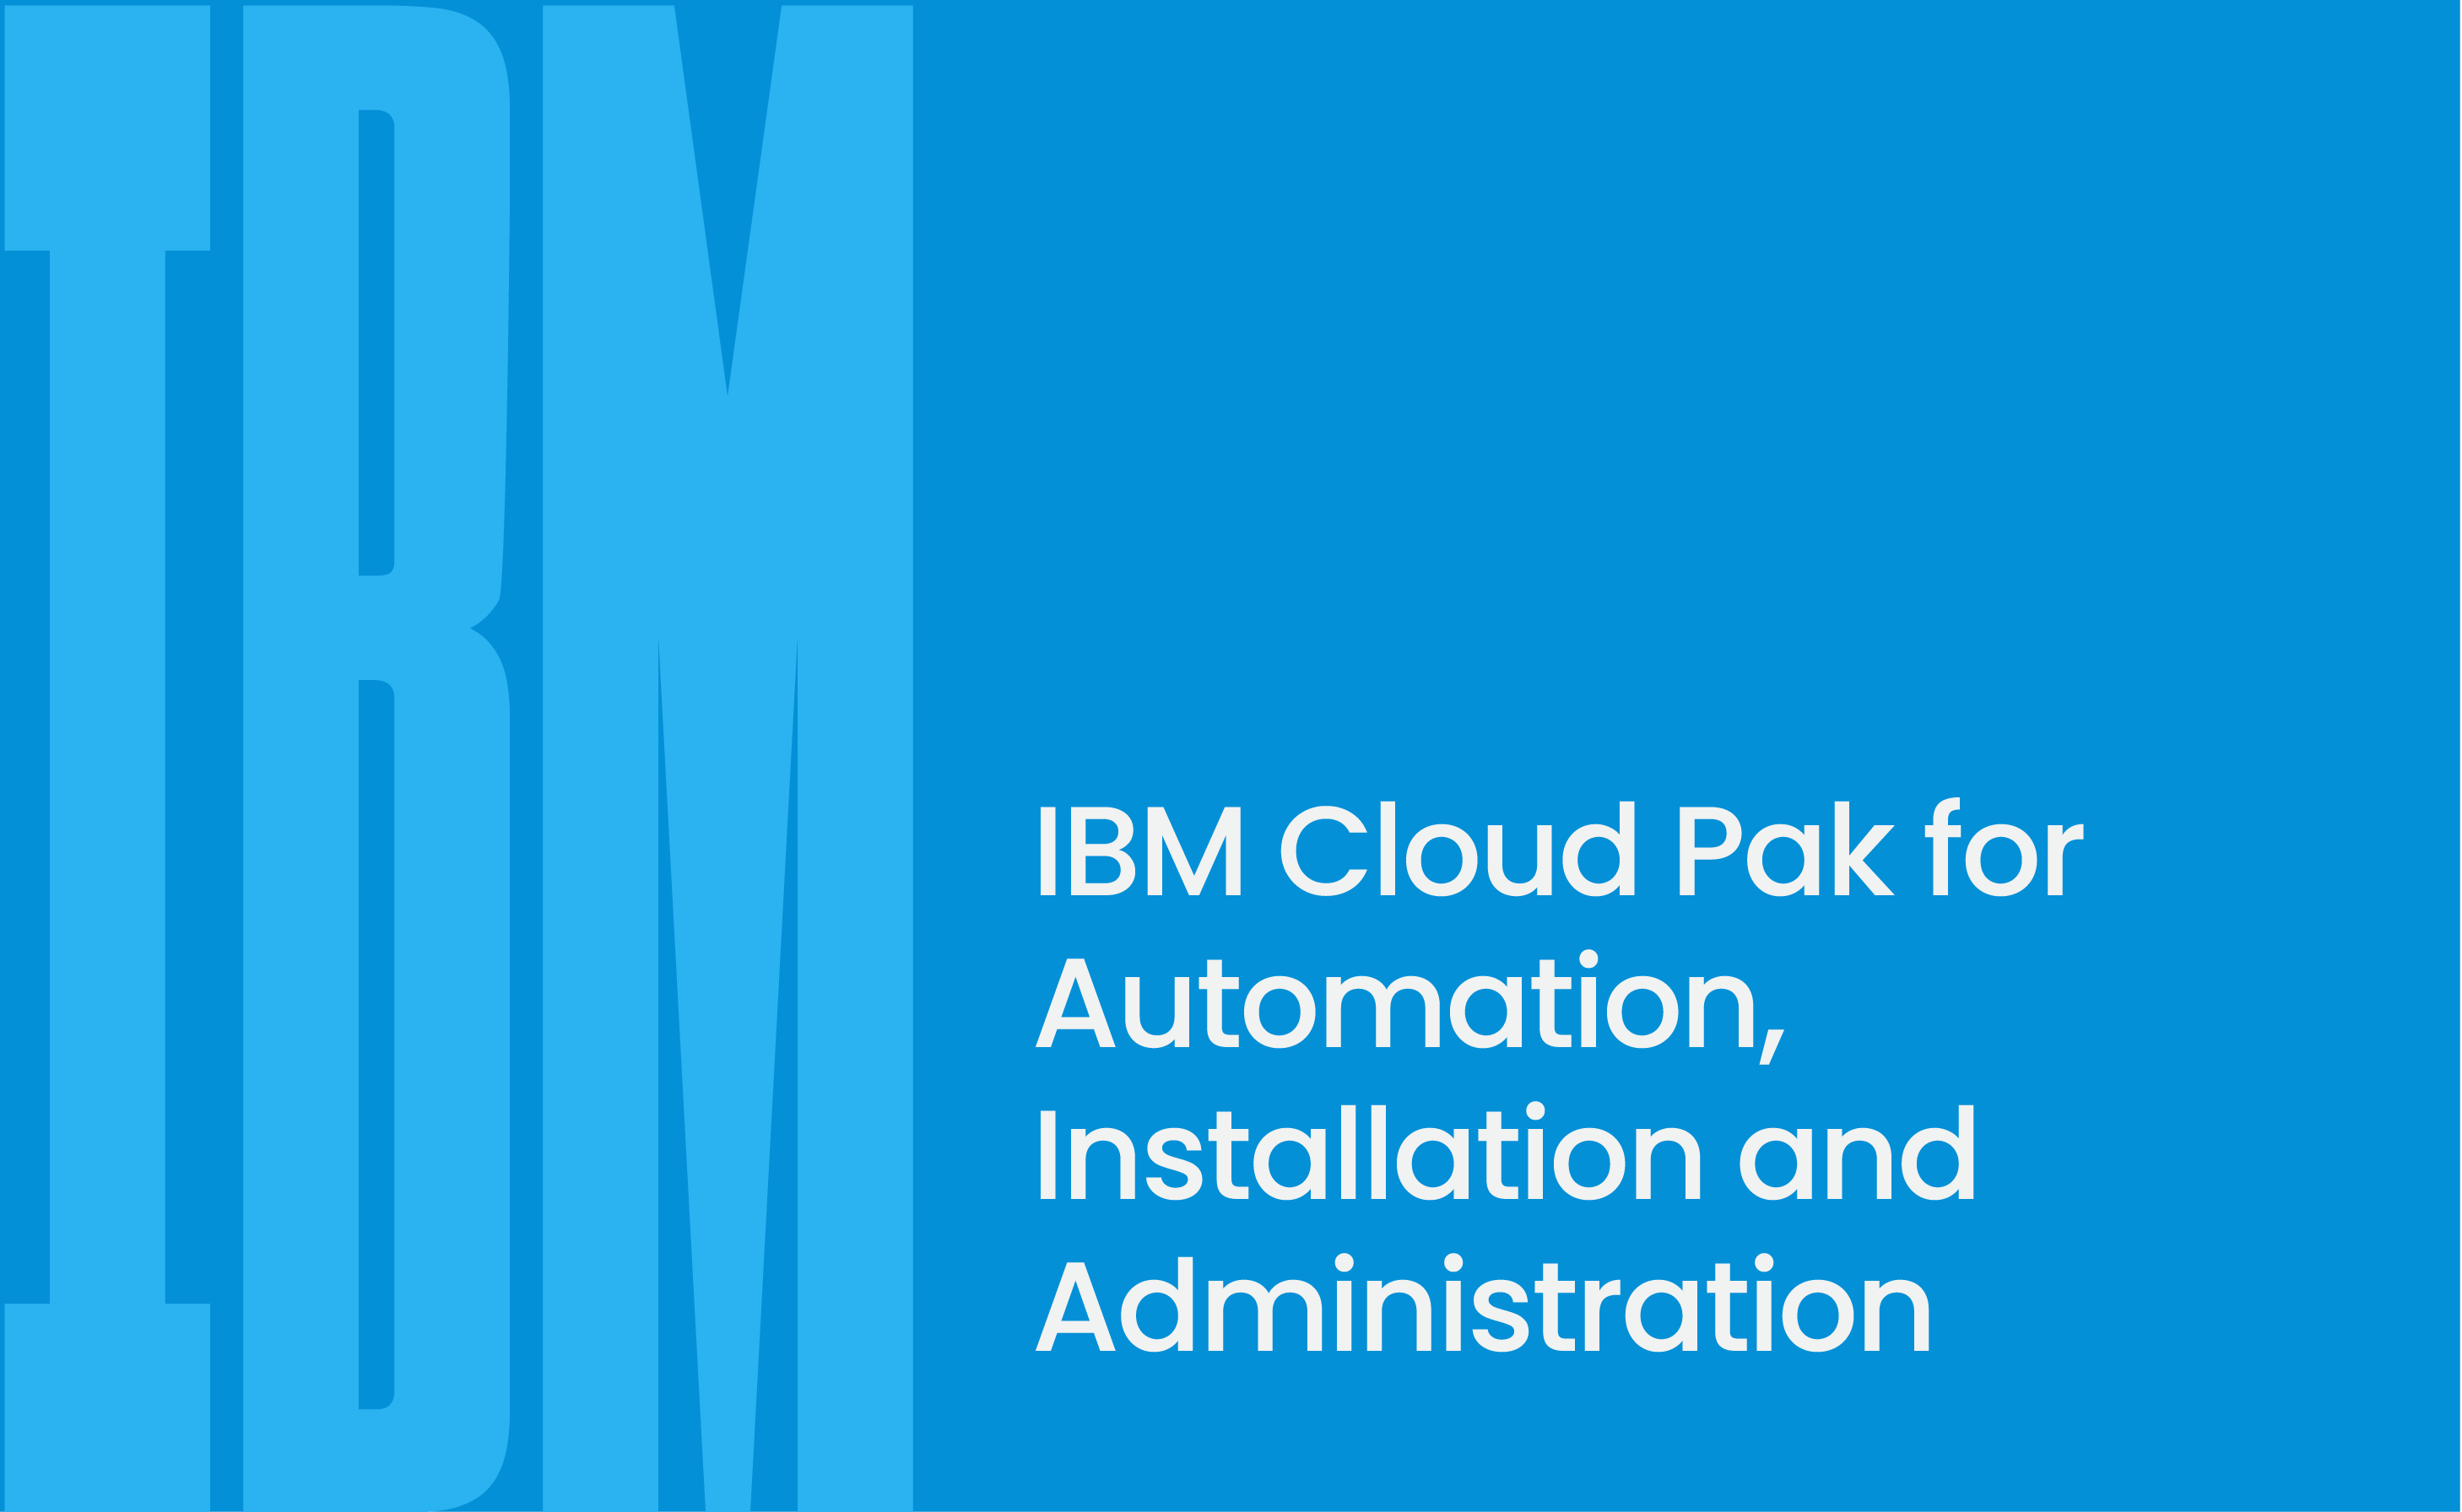 IBM Cloud Pak for Automation, Installation and Administration